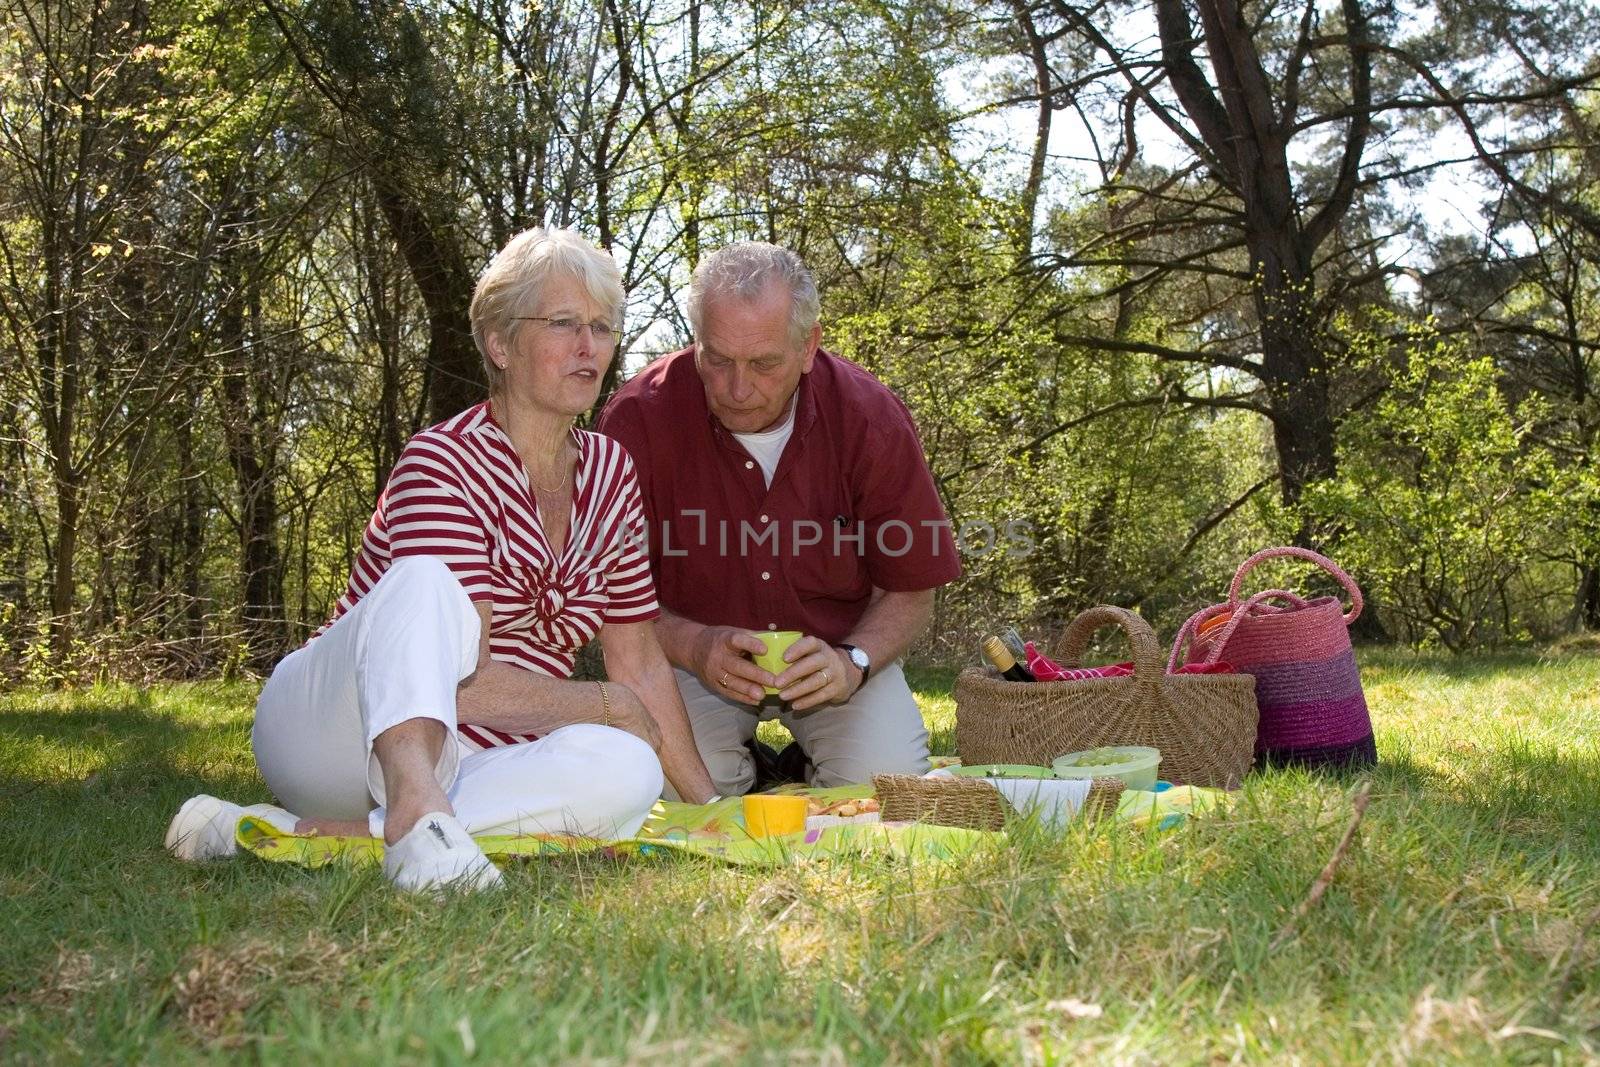 Elderly couple enjoying a leisure pic nic outdoors in the field